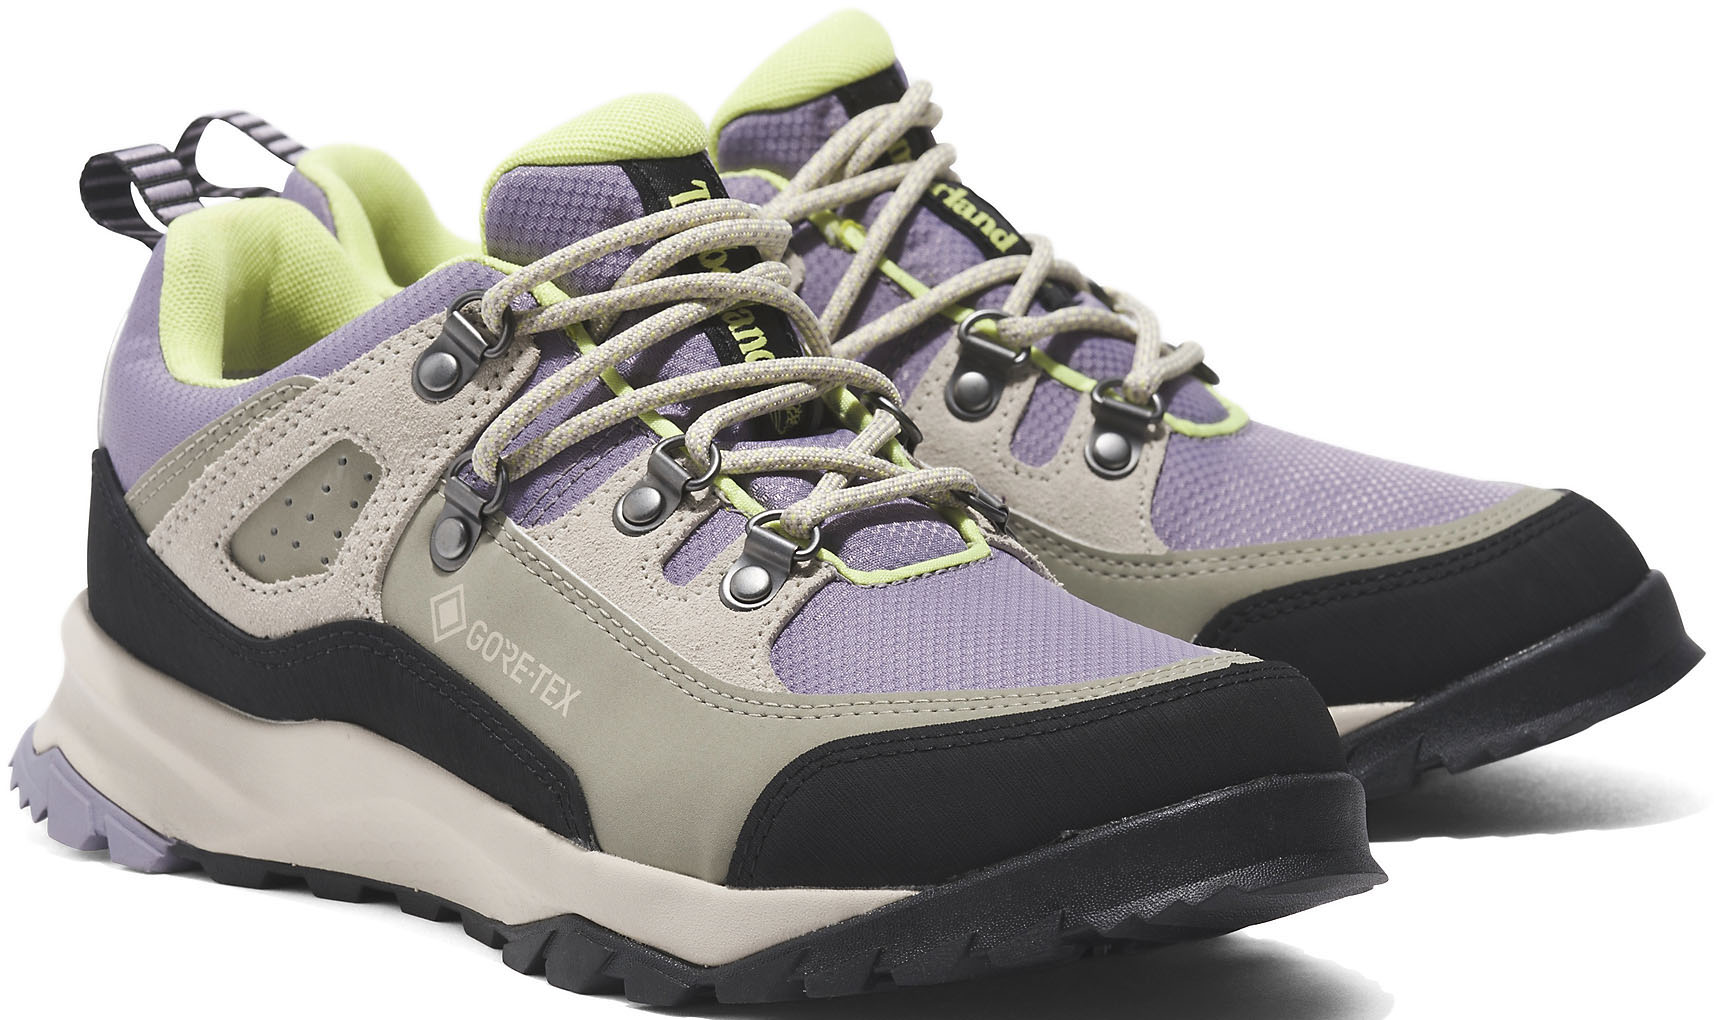 Timberland Outdoorschuh »Lincoln Peak LOW LACE UP GTX HIKING« von Timberland